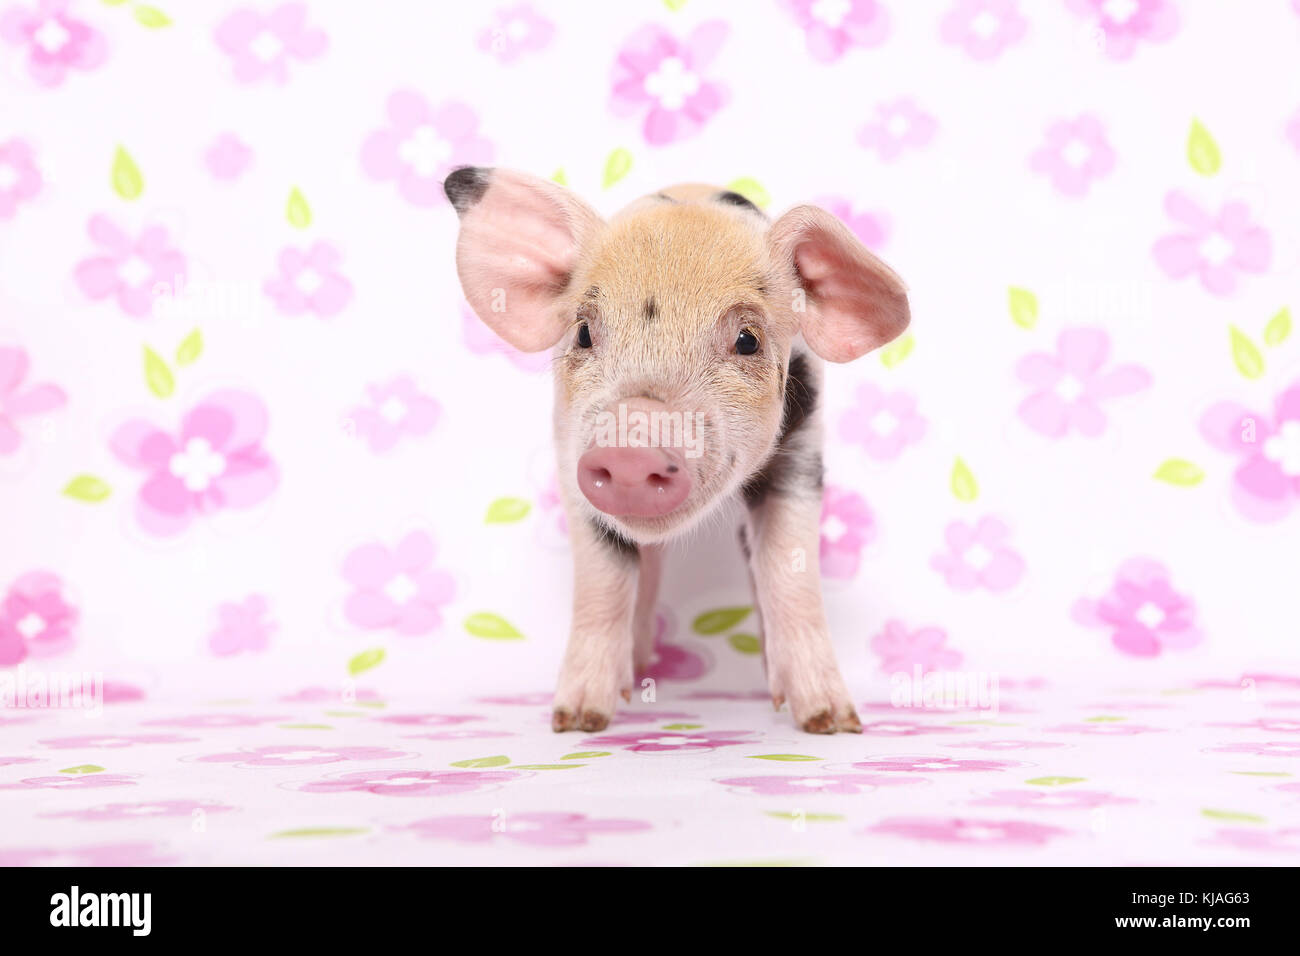 Domestic Pig, Turopolje x ?. Piglet standing. Studio picture seen against a white background with flower print. Germany Stock Photo